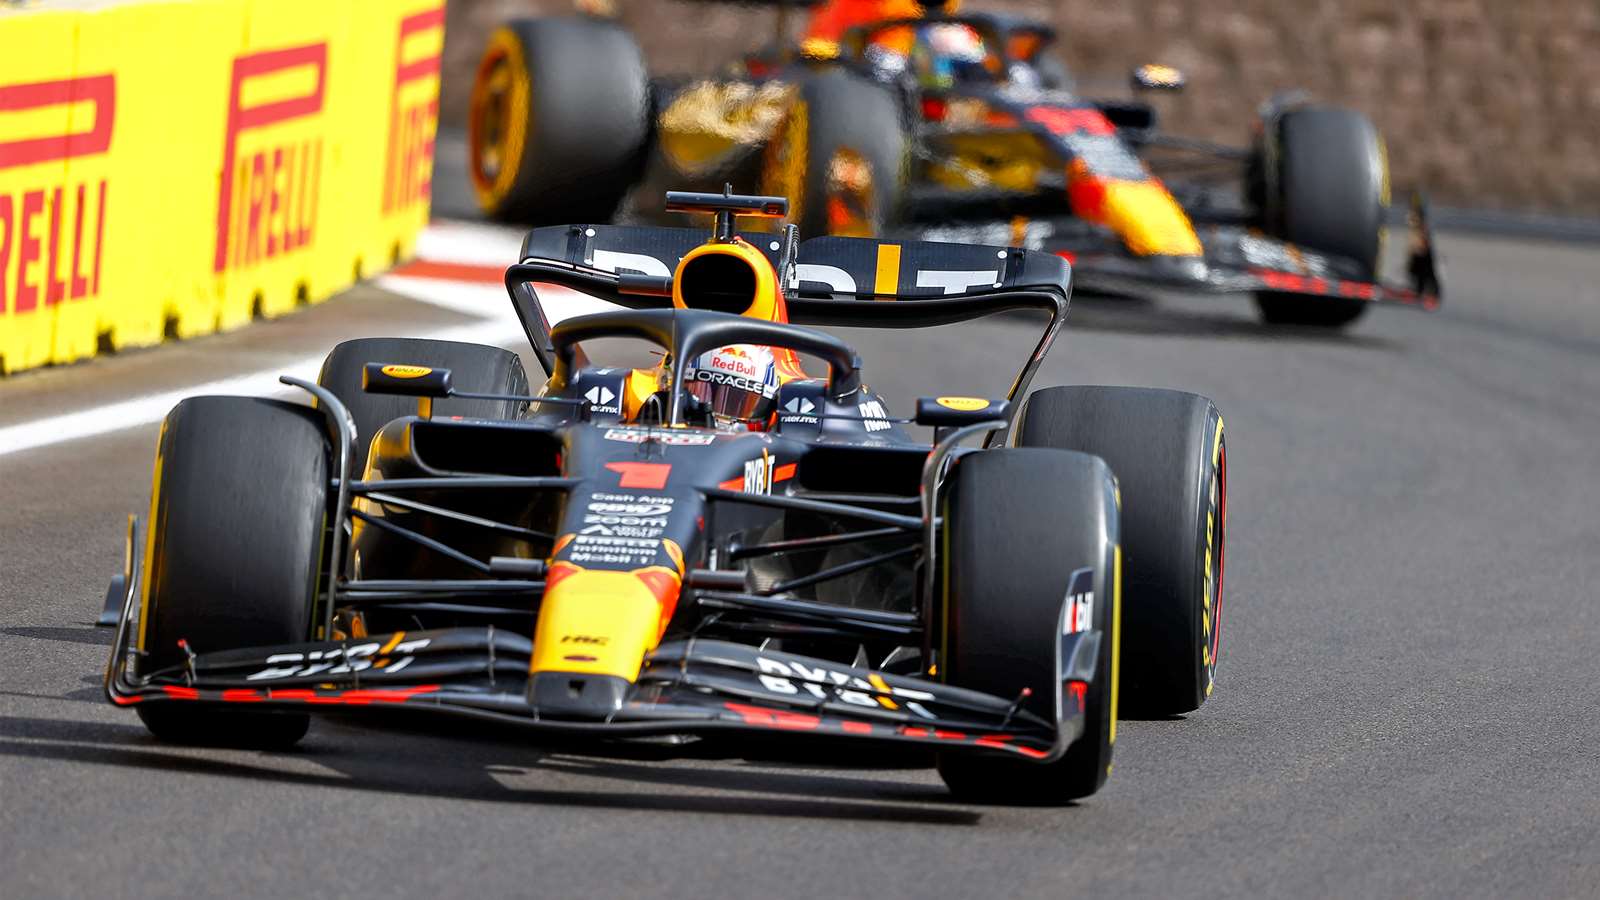 F1 needs a quick fix to stem Red Bull's dominance